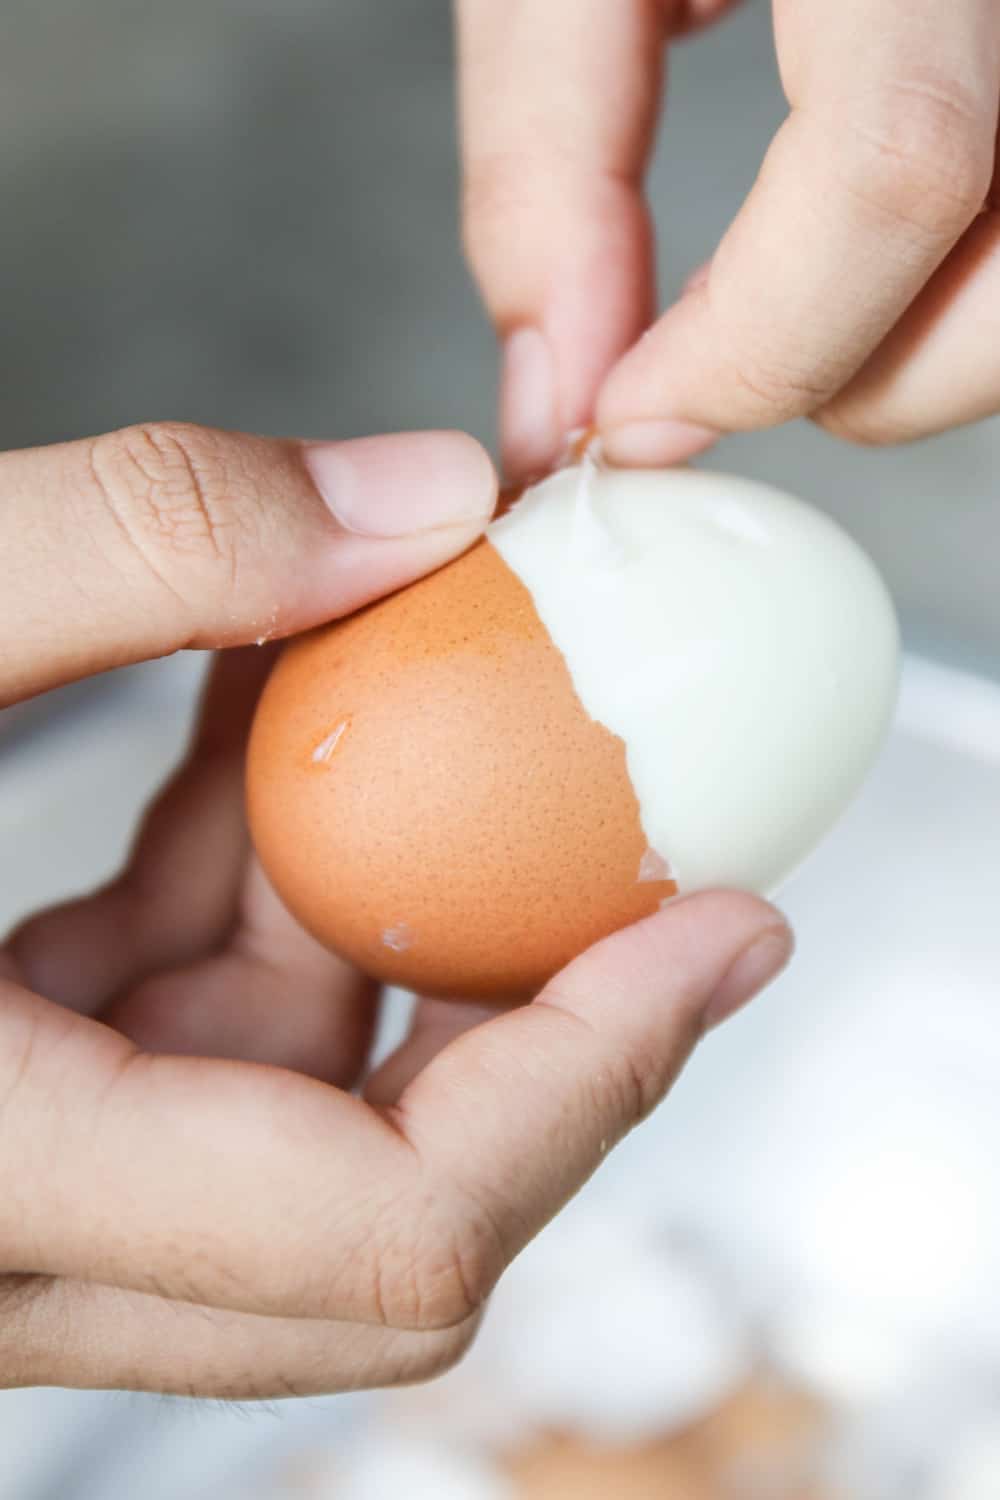 The Risk of Consuming Expired Hard-Boiled Eggs